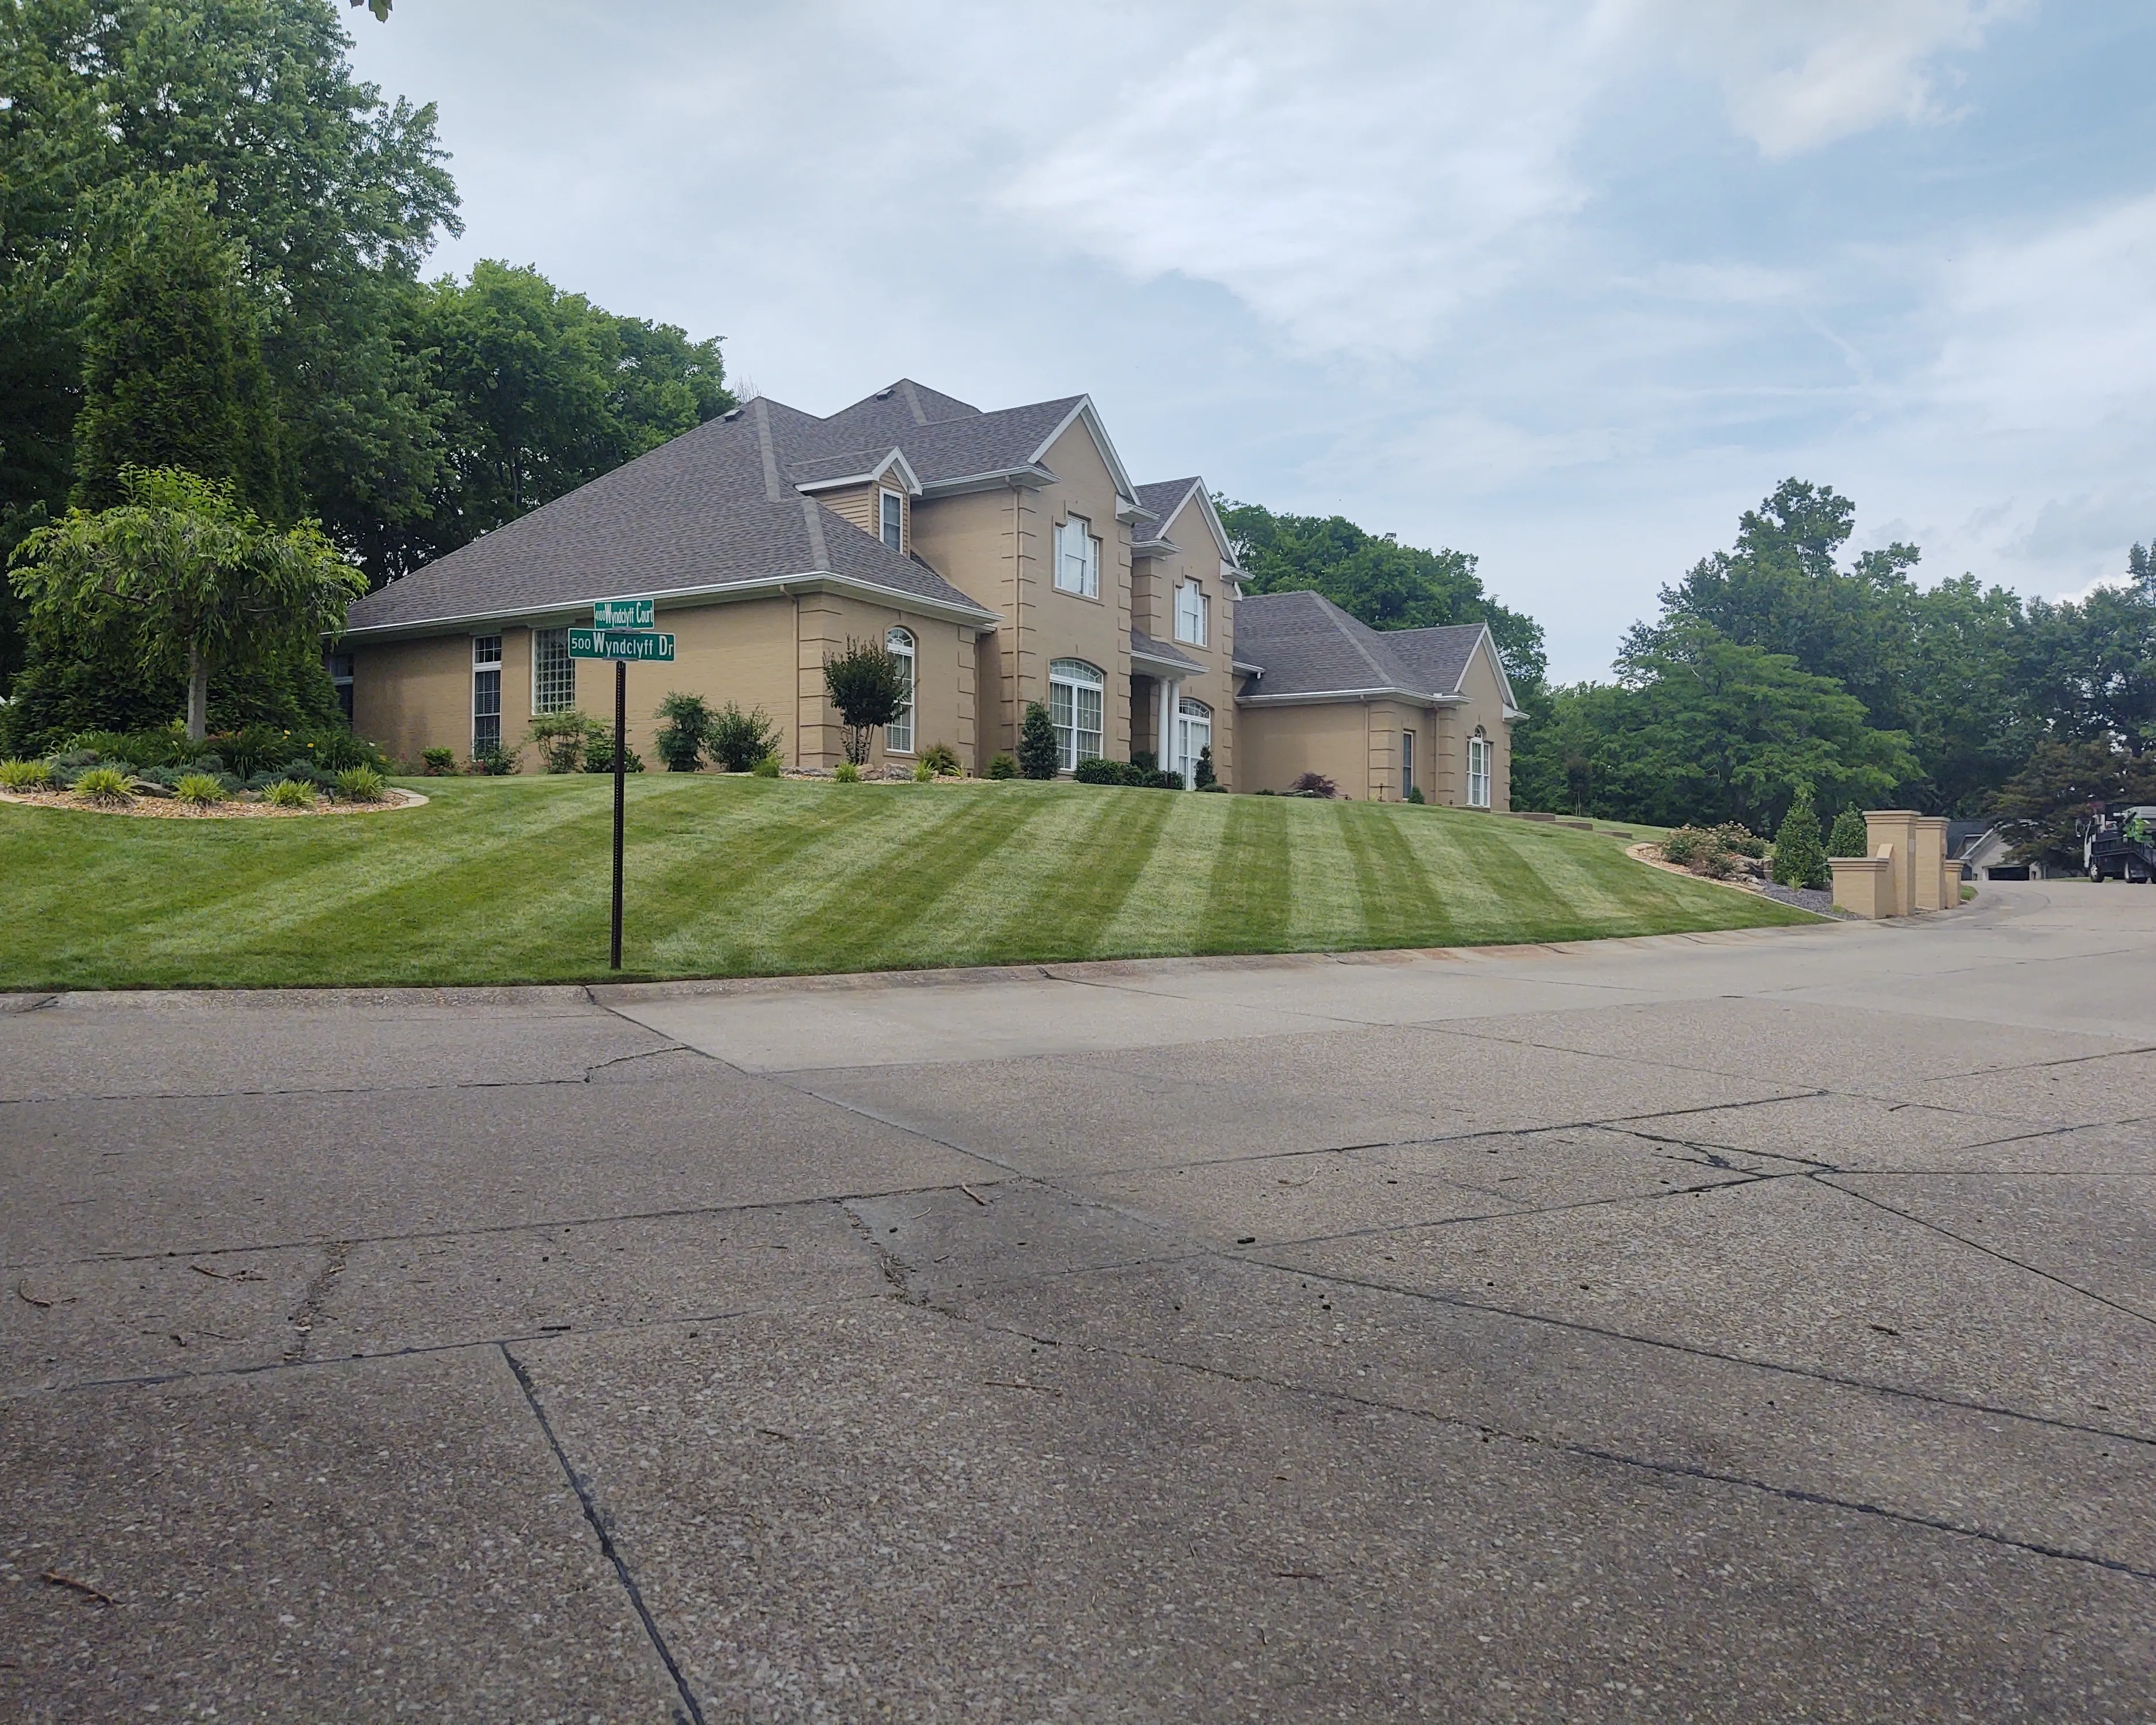 All Photos for The Grass Guys Complete Lawn Care LLC. in Evansville, IN